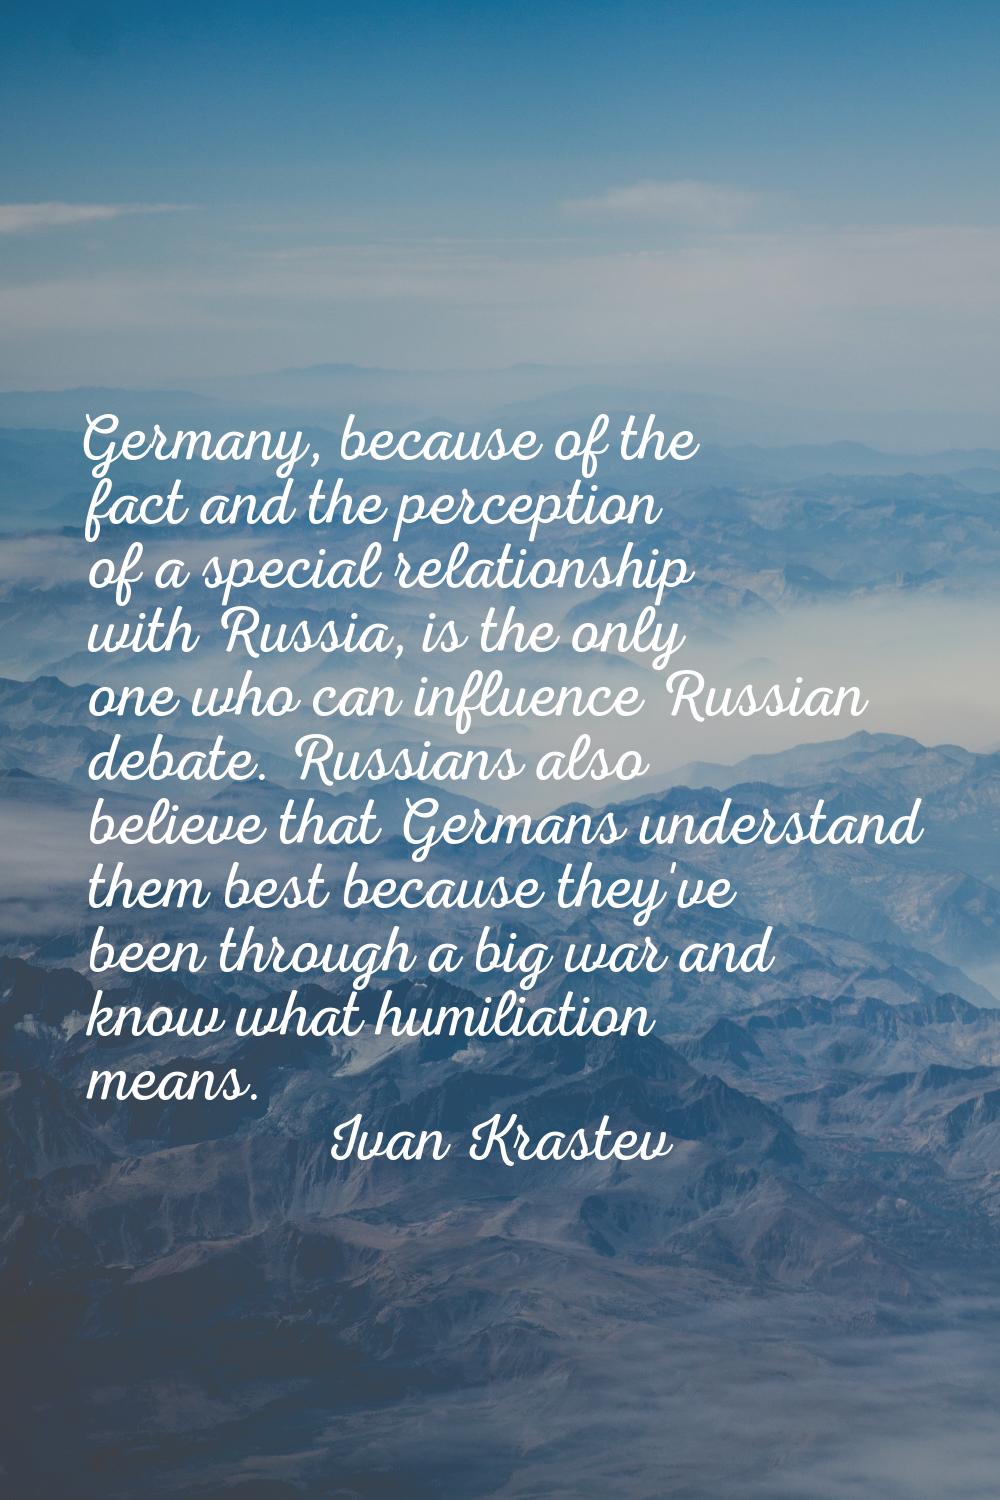 Germany, because of the fact and the perception of a special relationship with Russia, is the only 